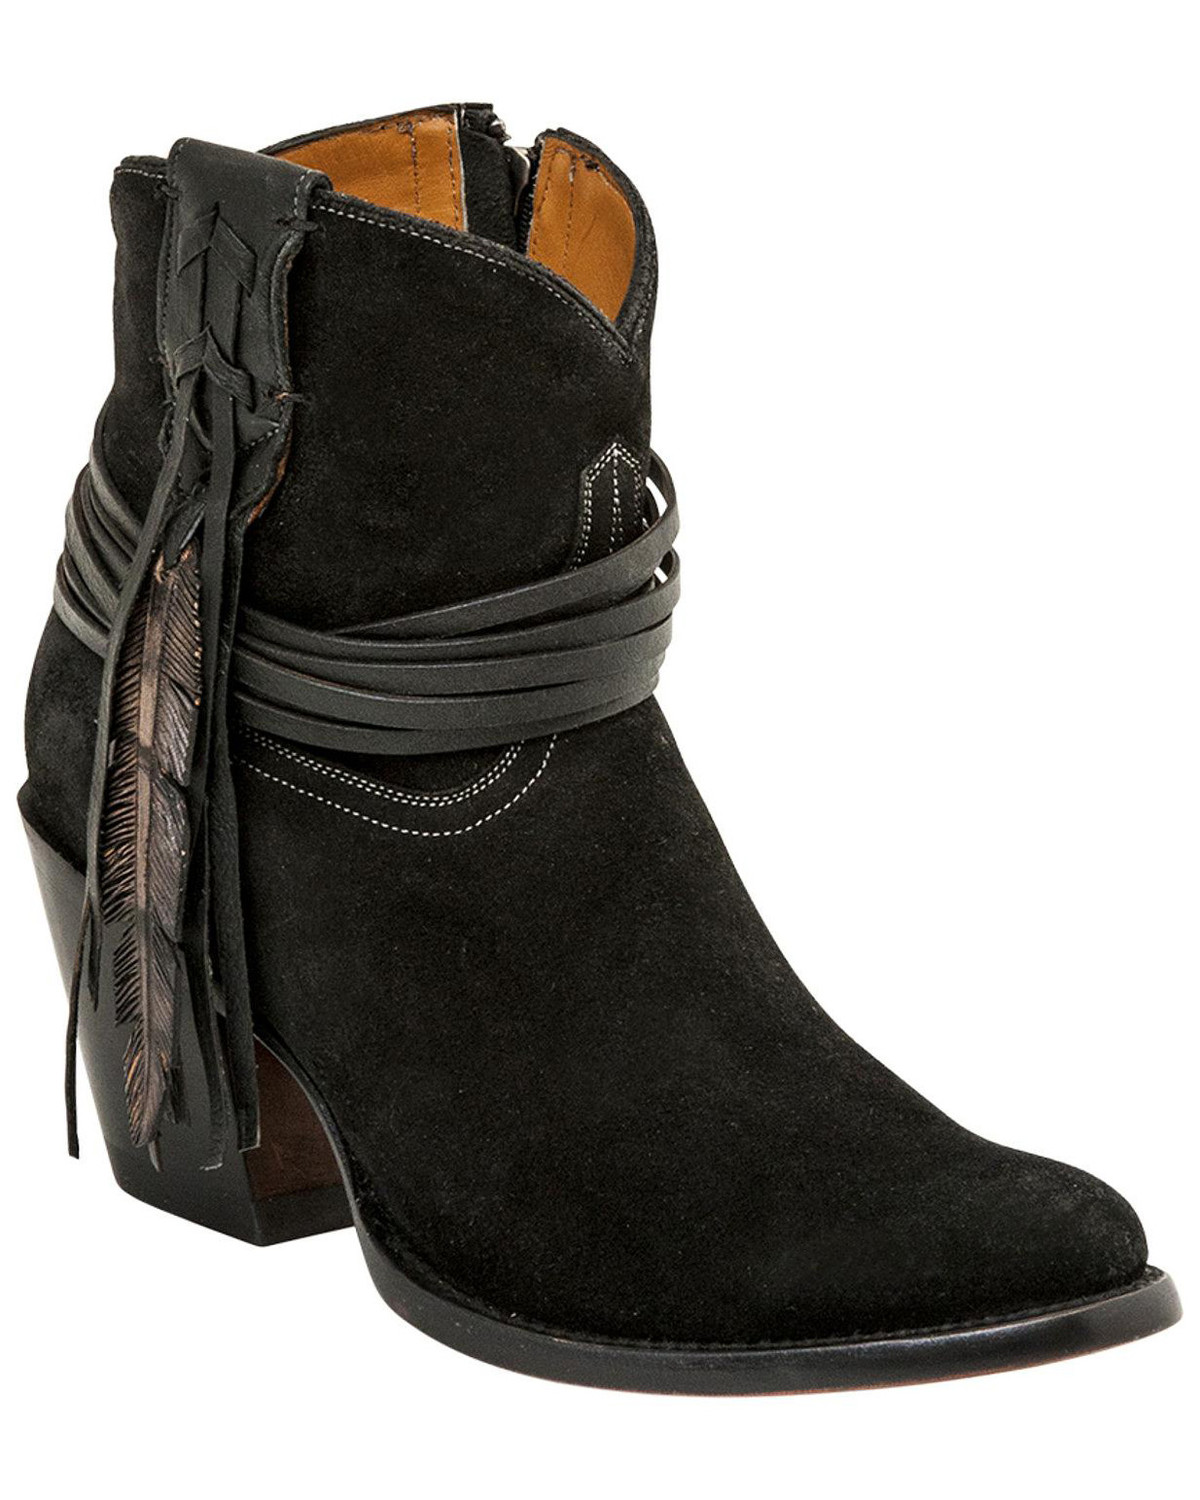 Short Cowgirl Boots: Ankle Boots & Booties - Sheplers